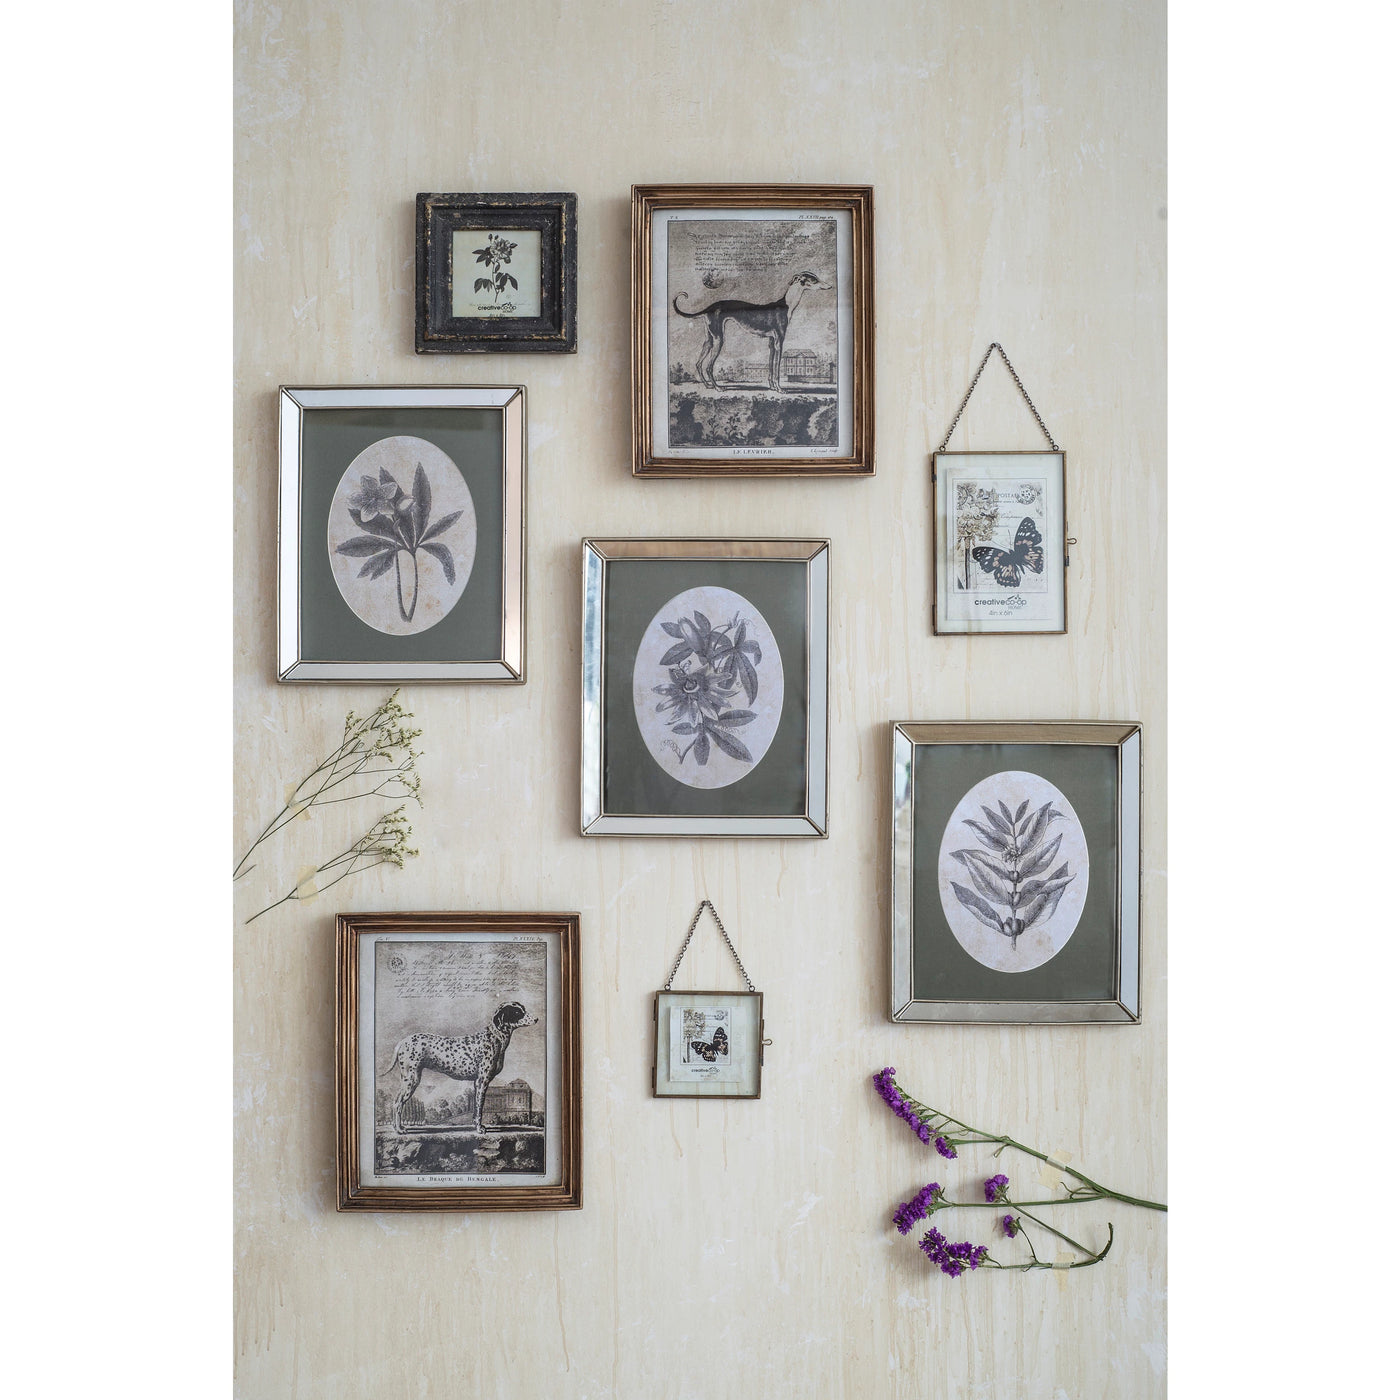 Brass and Glass Photo Frames with Chain